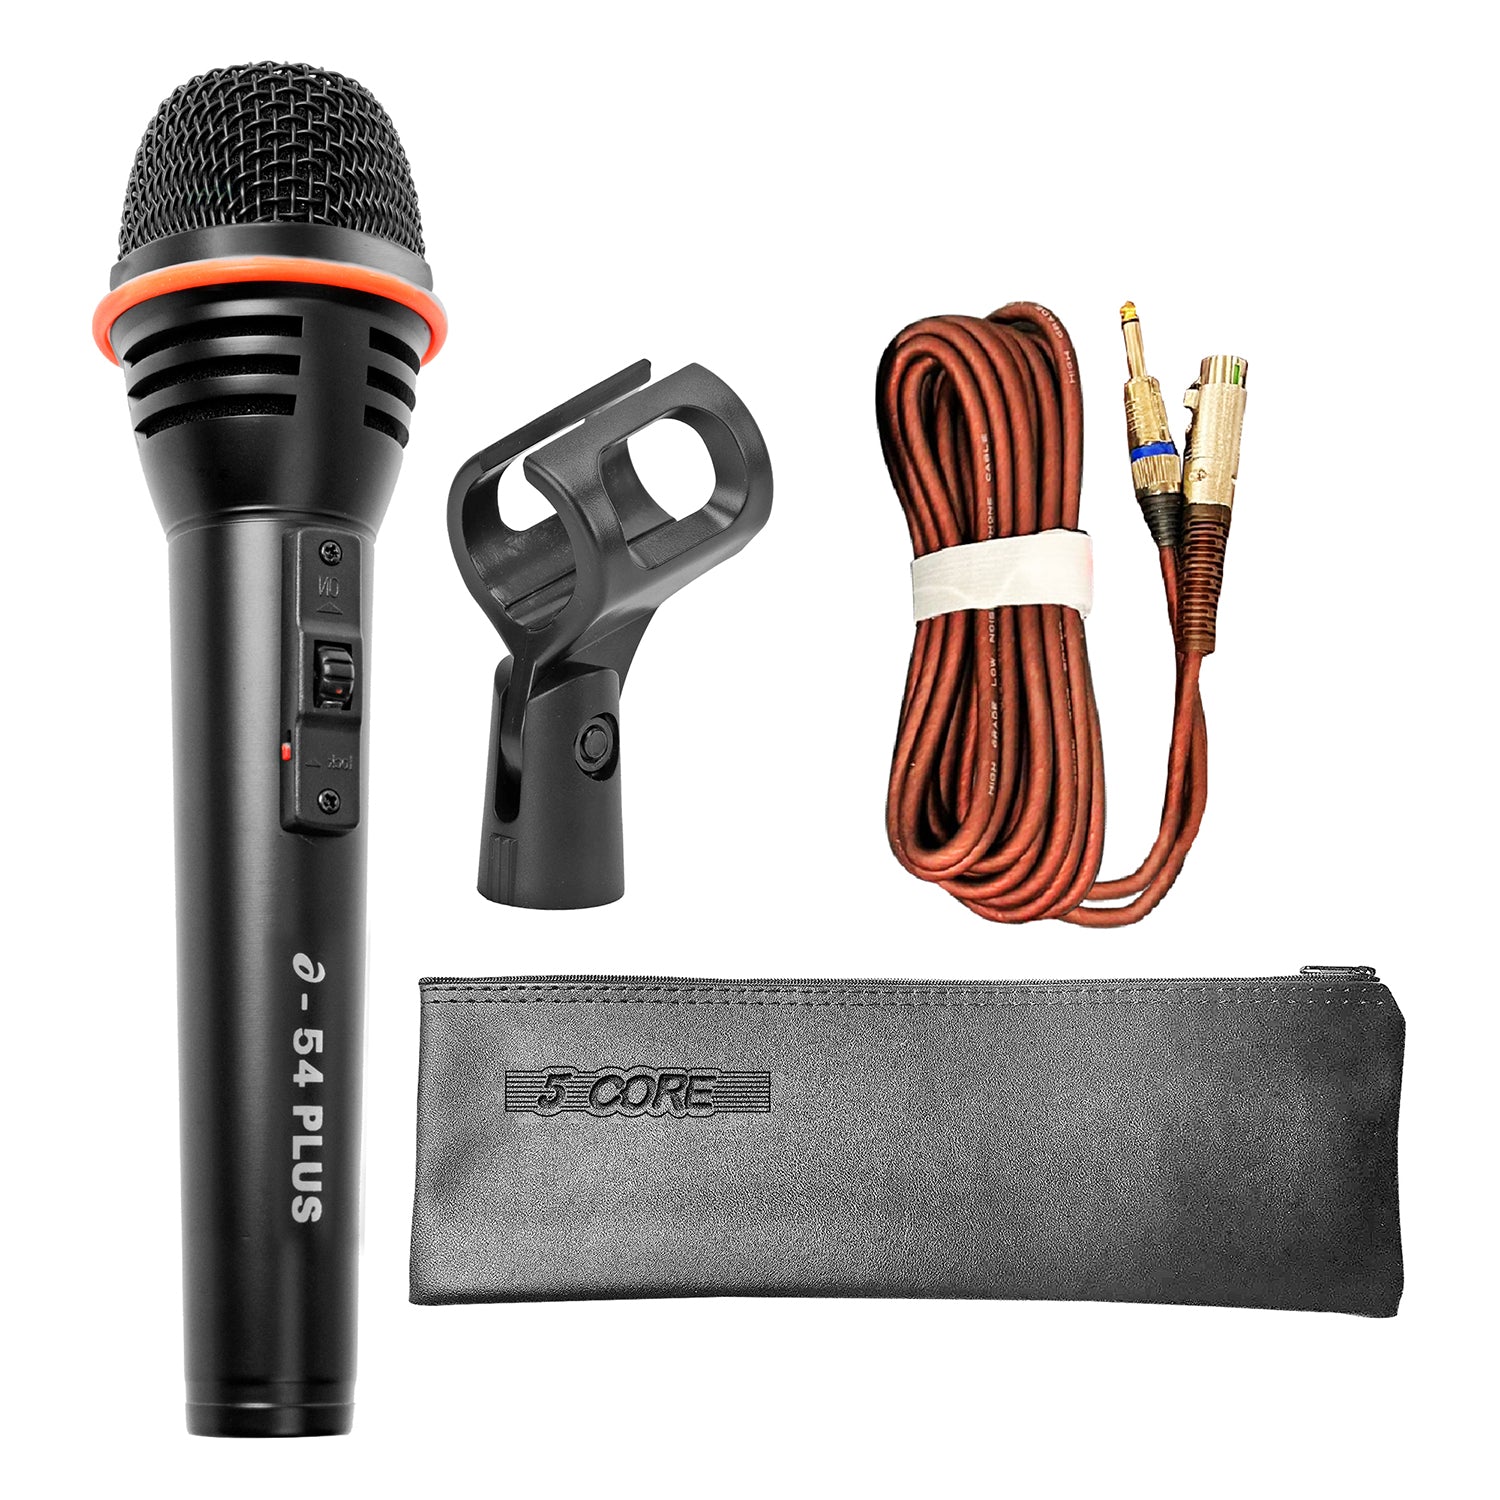 5 Core Microphone 1 Piece Black Dynamic Karaoke XLR Wired Mic Professional Studio Mic w ON/OFF Switch Integrated Pop Filter Cardioid Unidirectional Micrófono for Singing DJ Podcast Speeches Includes Cable Mic Holder Bag - A-54